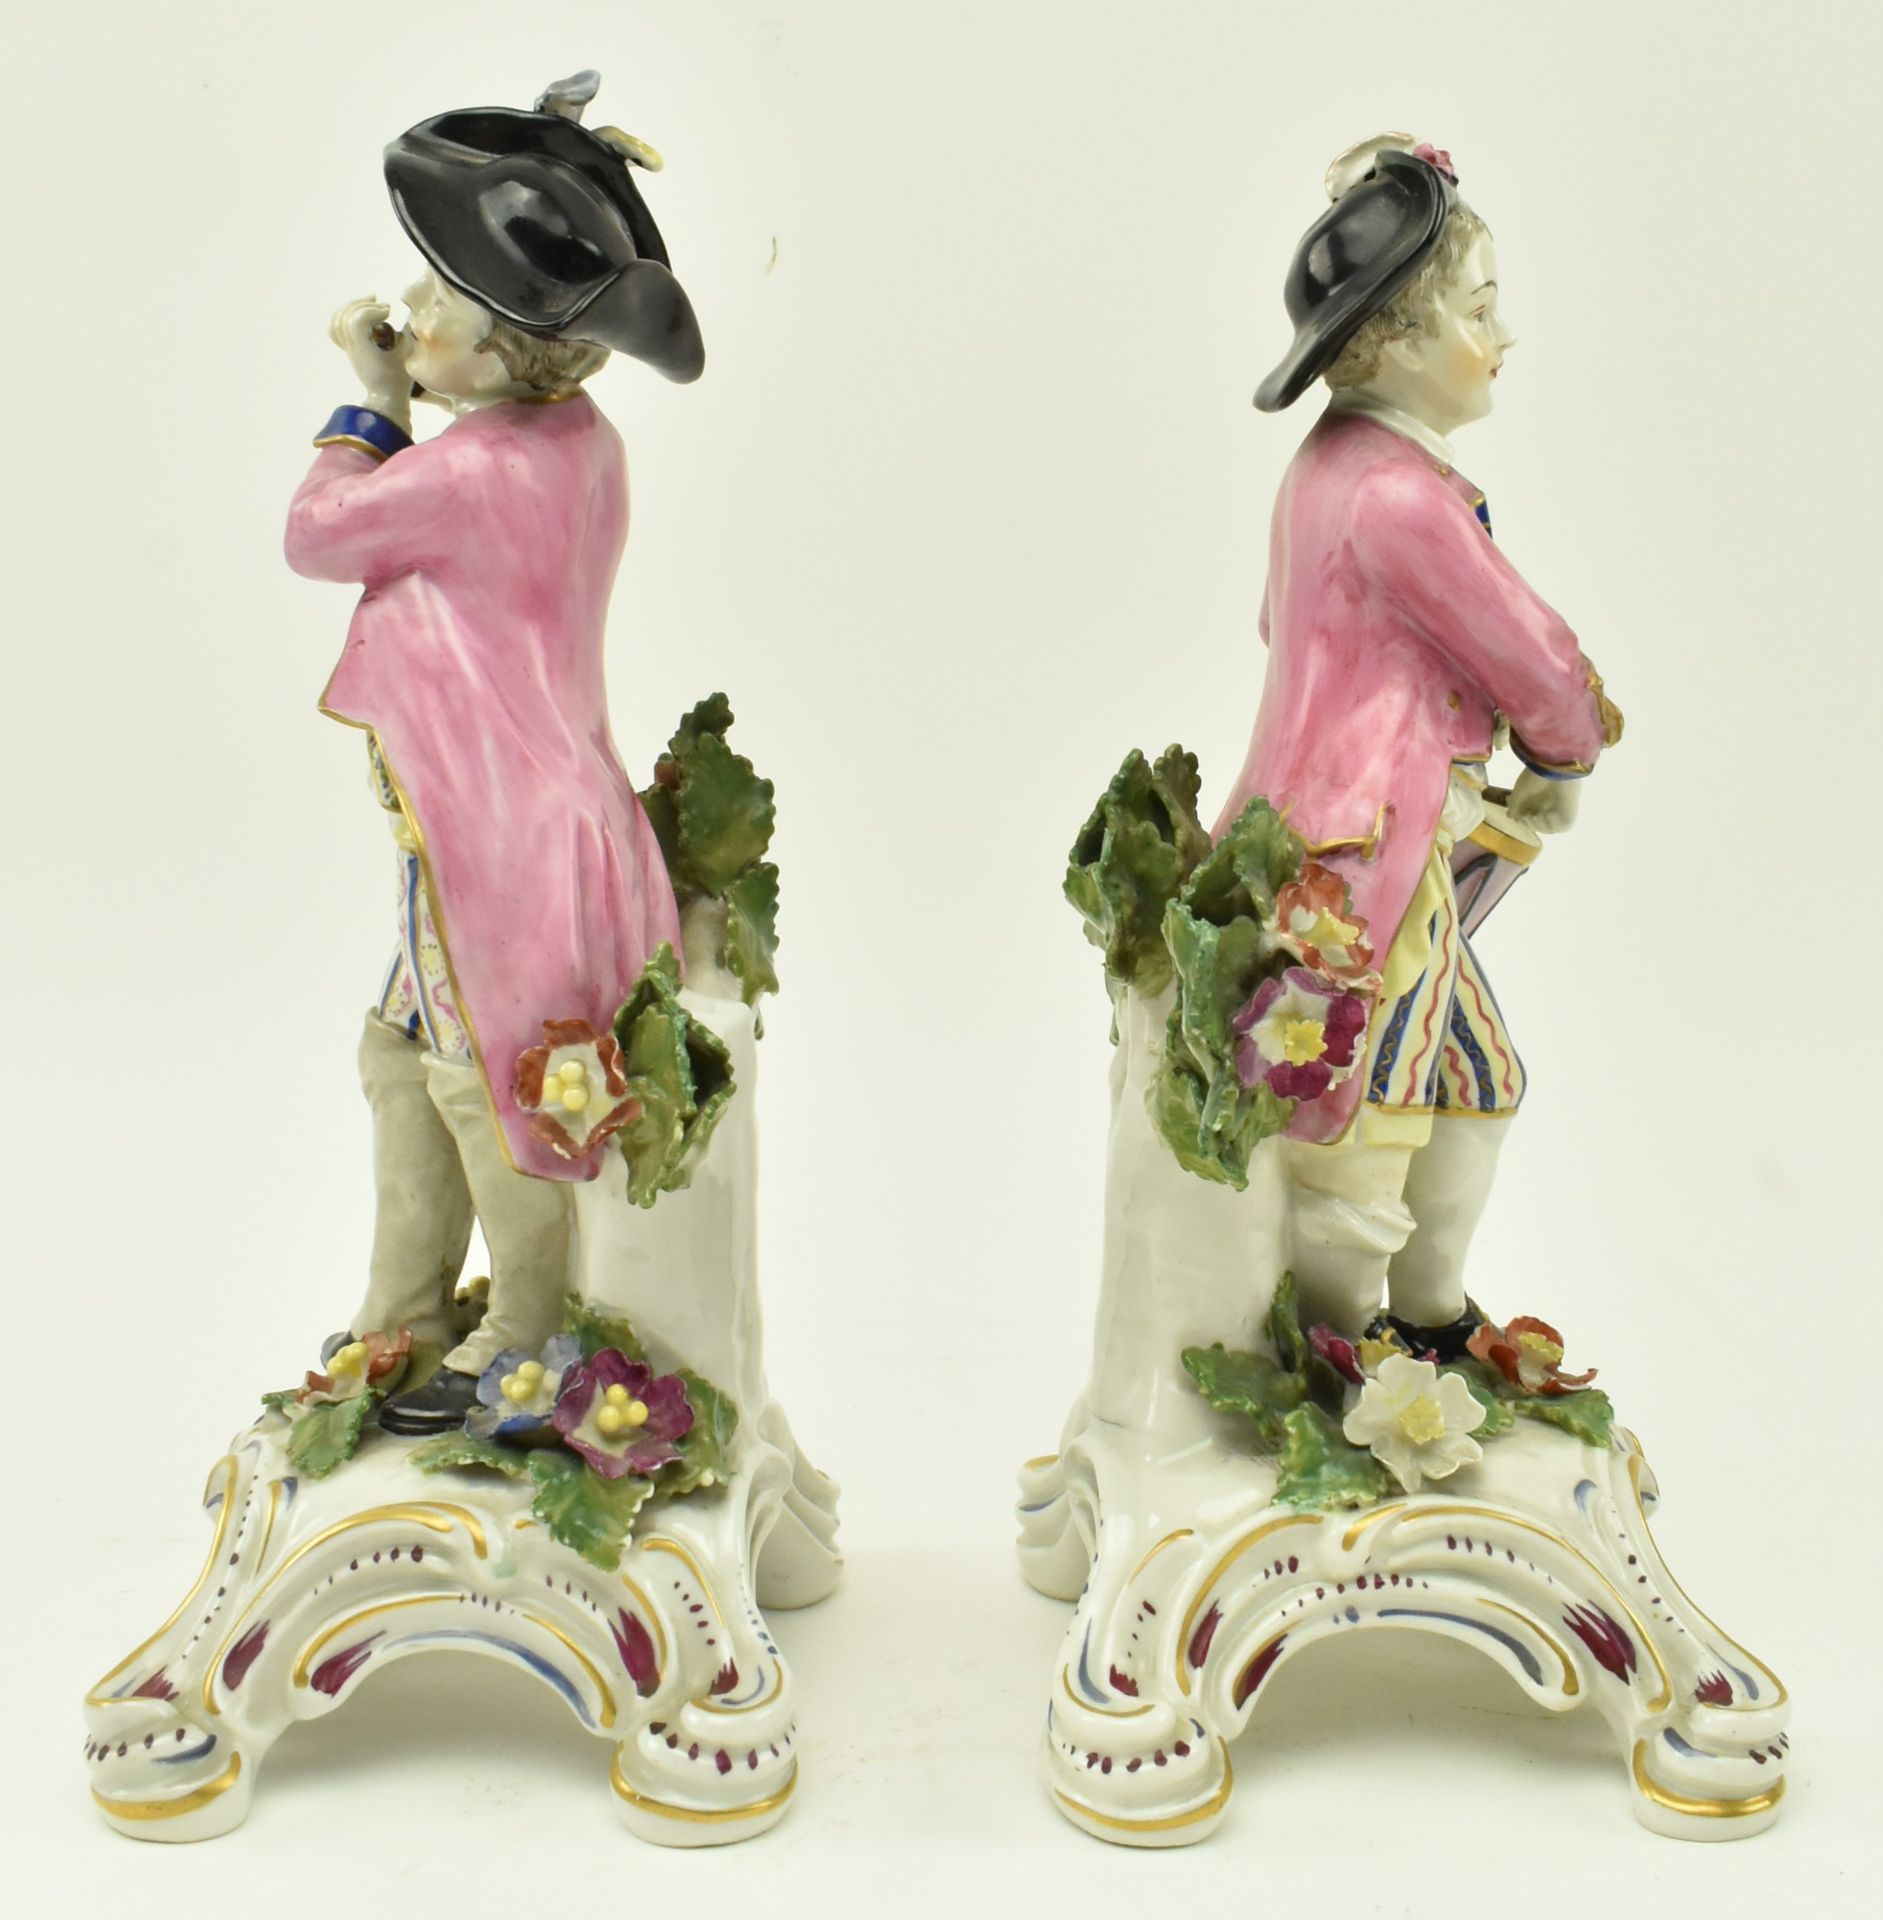 PAIR OF WILLIAM COCKWORTHY PLYMOUTH FIGURES OF MUSICIANS - Image 4 of 5